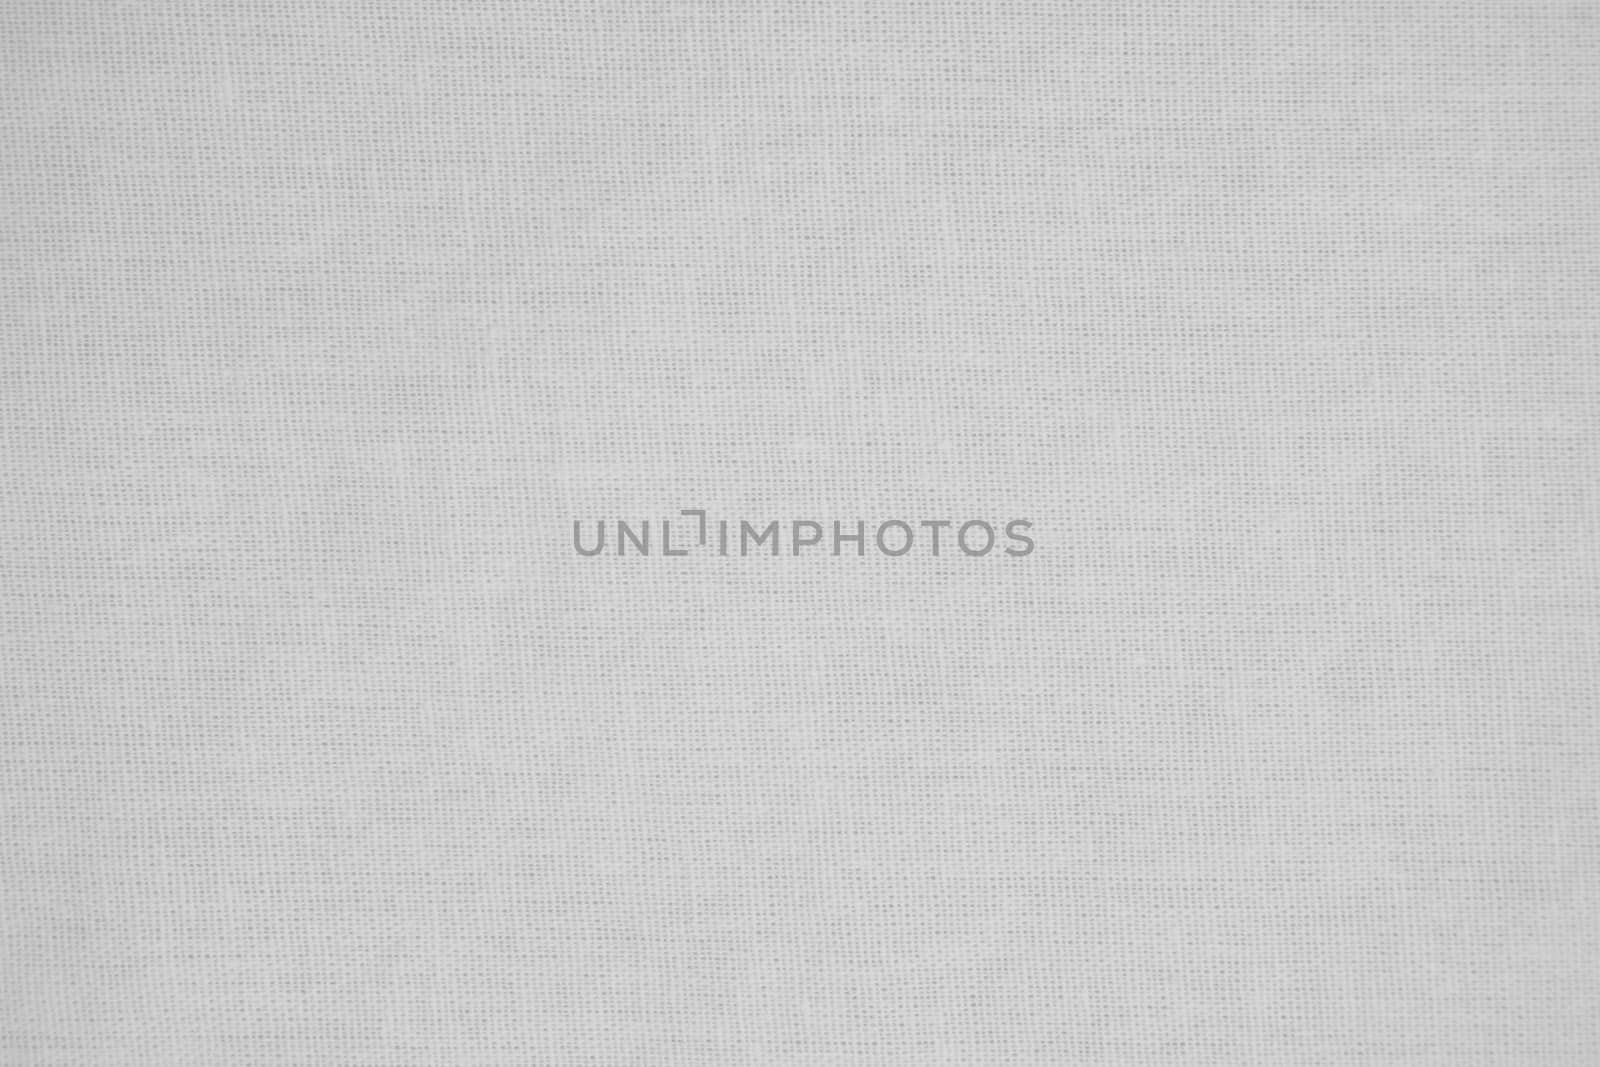 Close up White cotton fabric texture background.